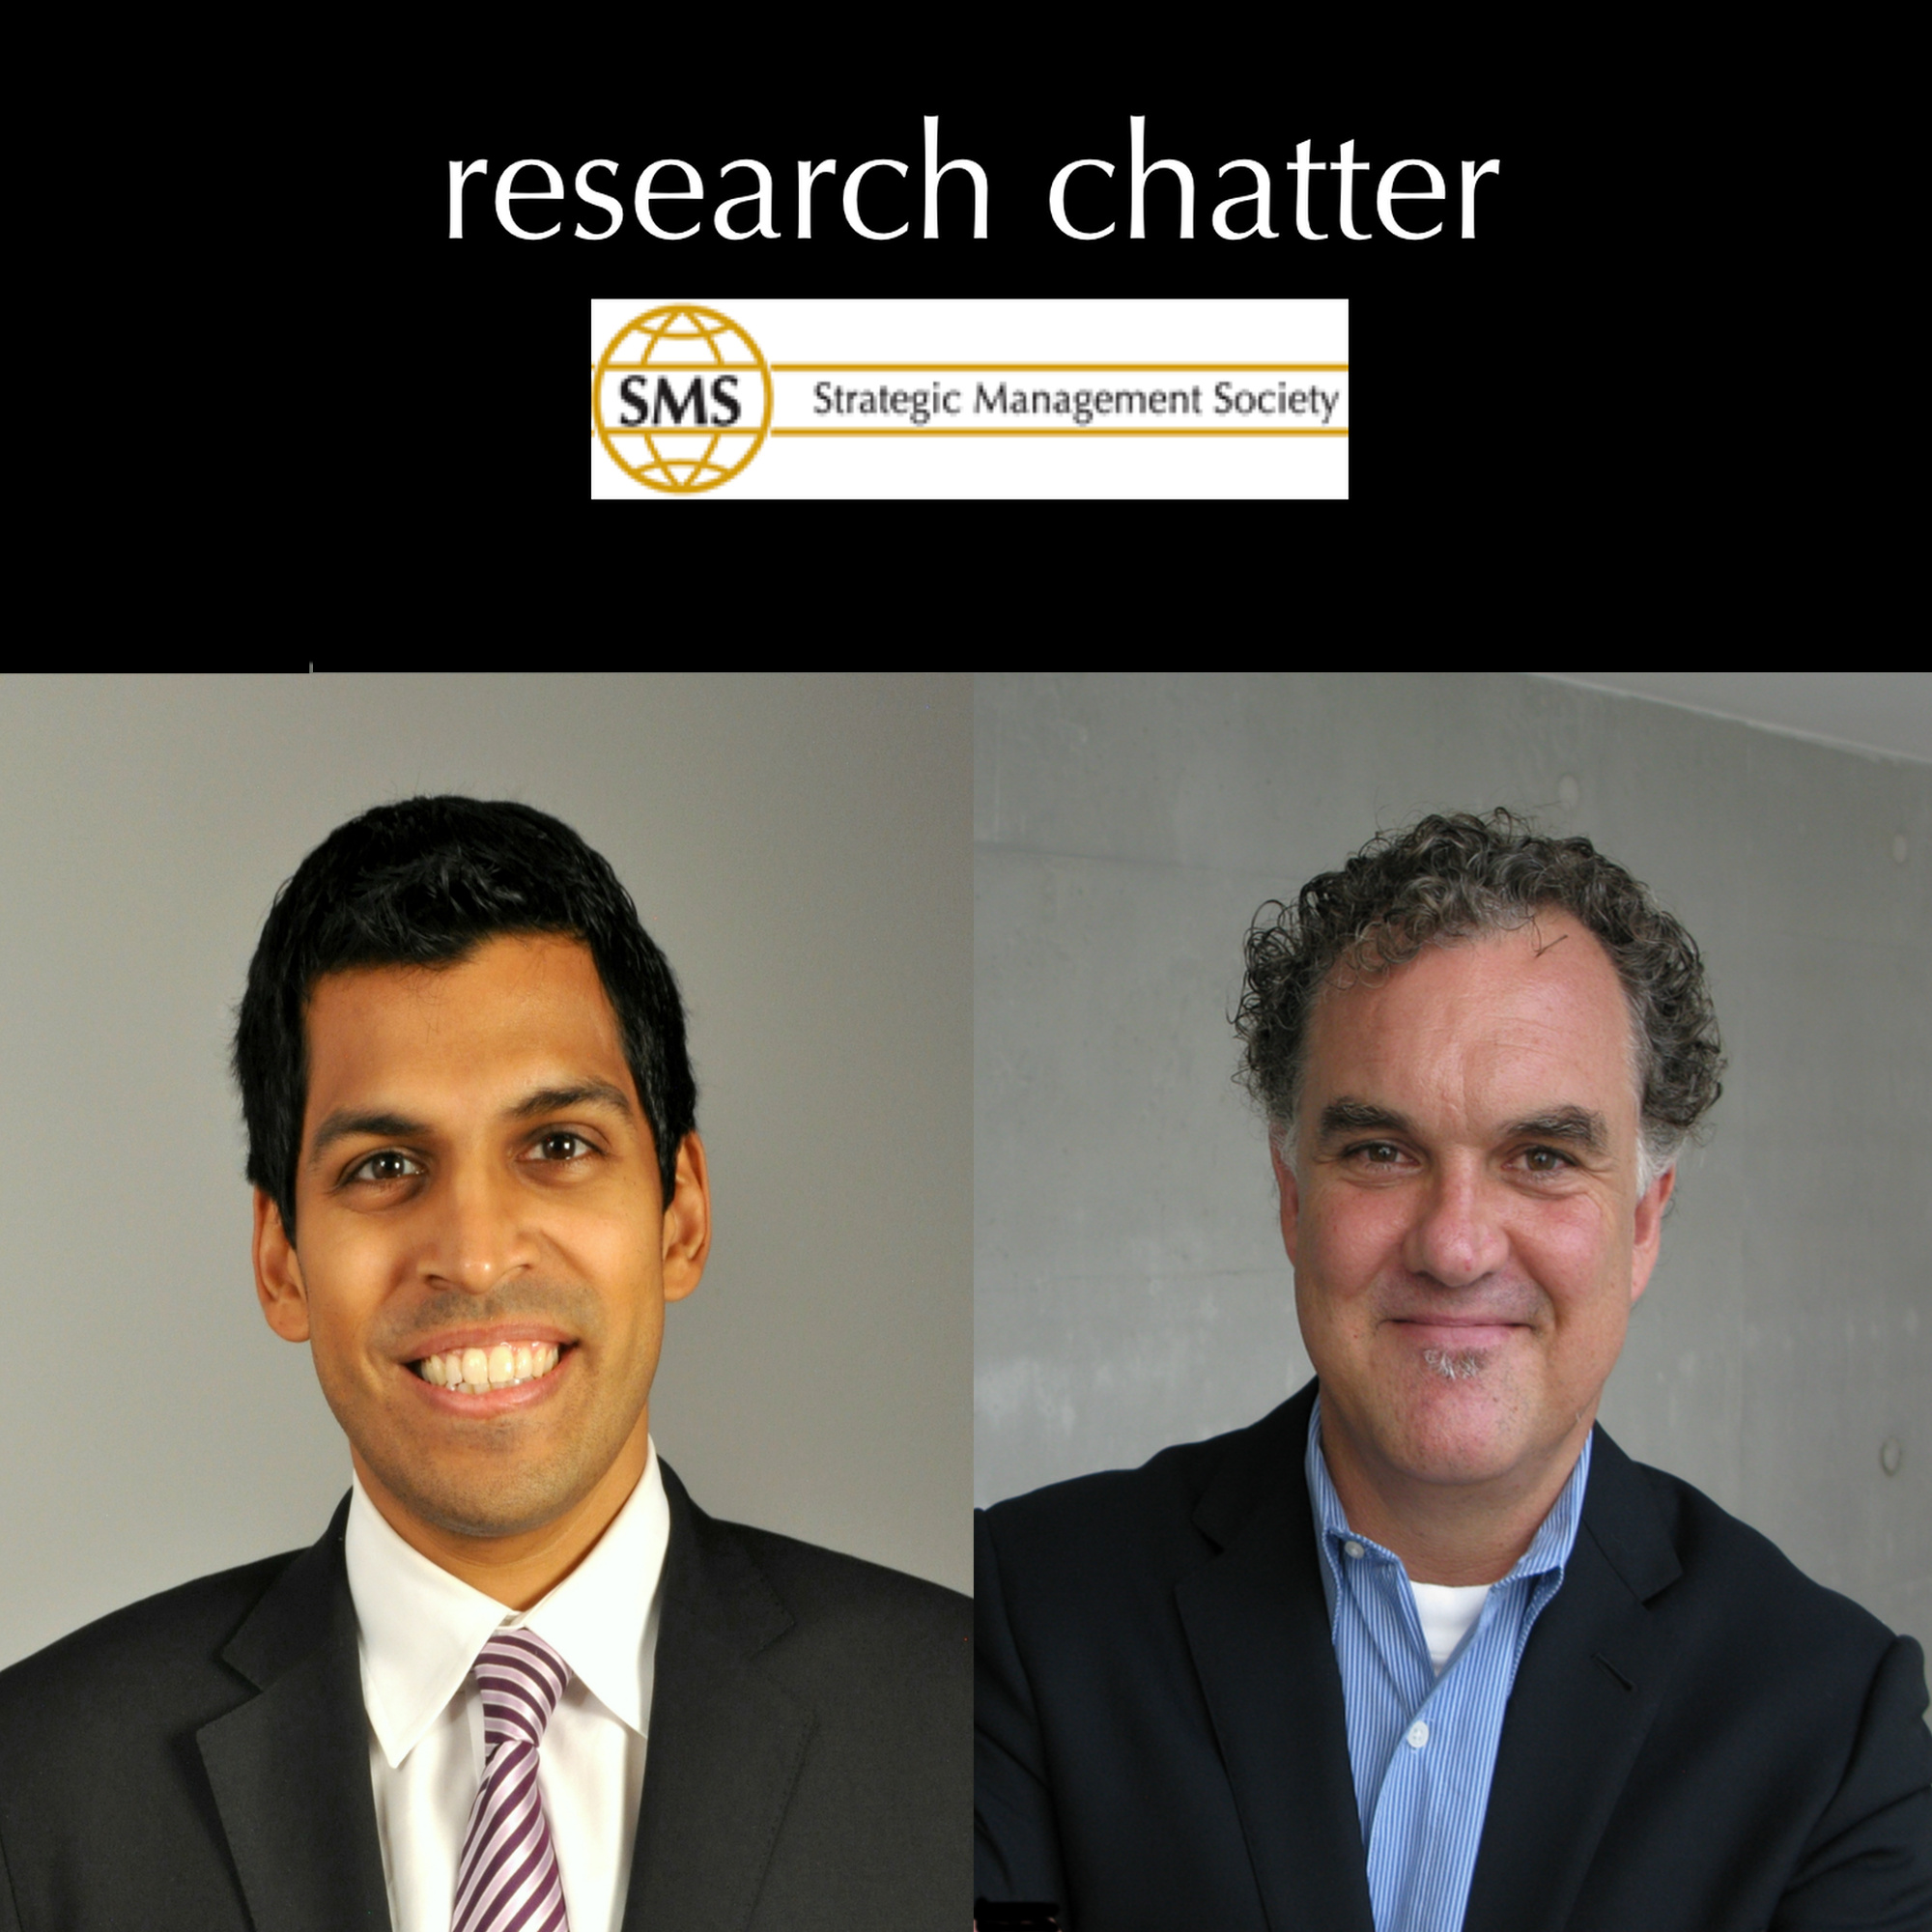 Research chatter: Big ideas from business school profs